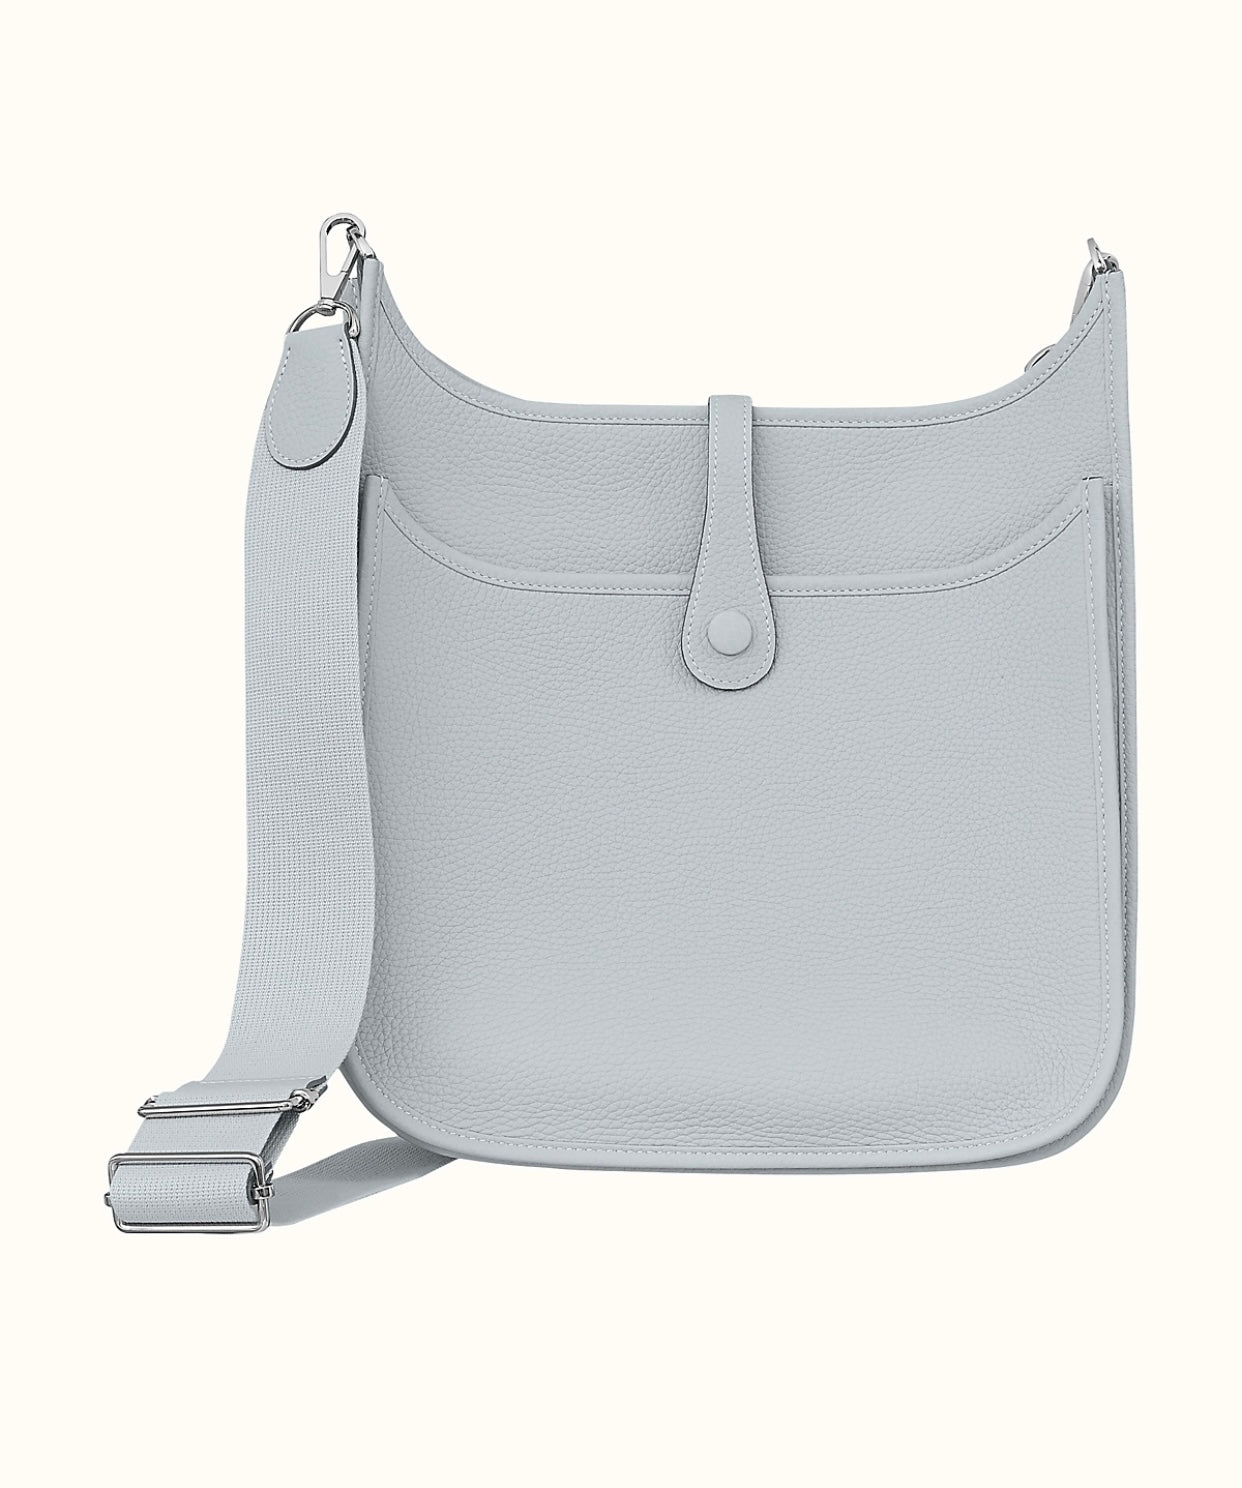 Hermes Bambou Clemence Leather and Toile Canvas Evelyne III 29 Bag